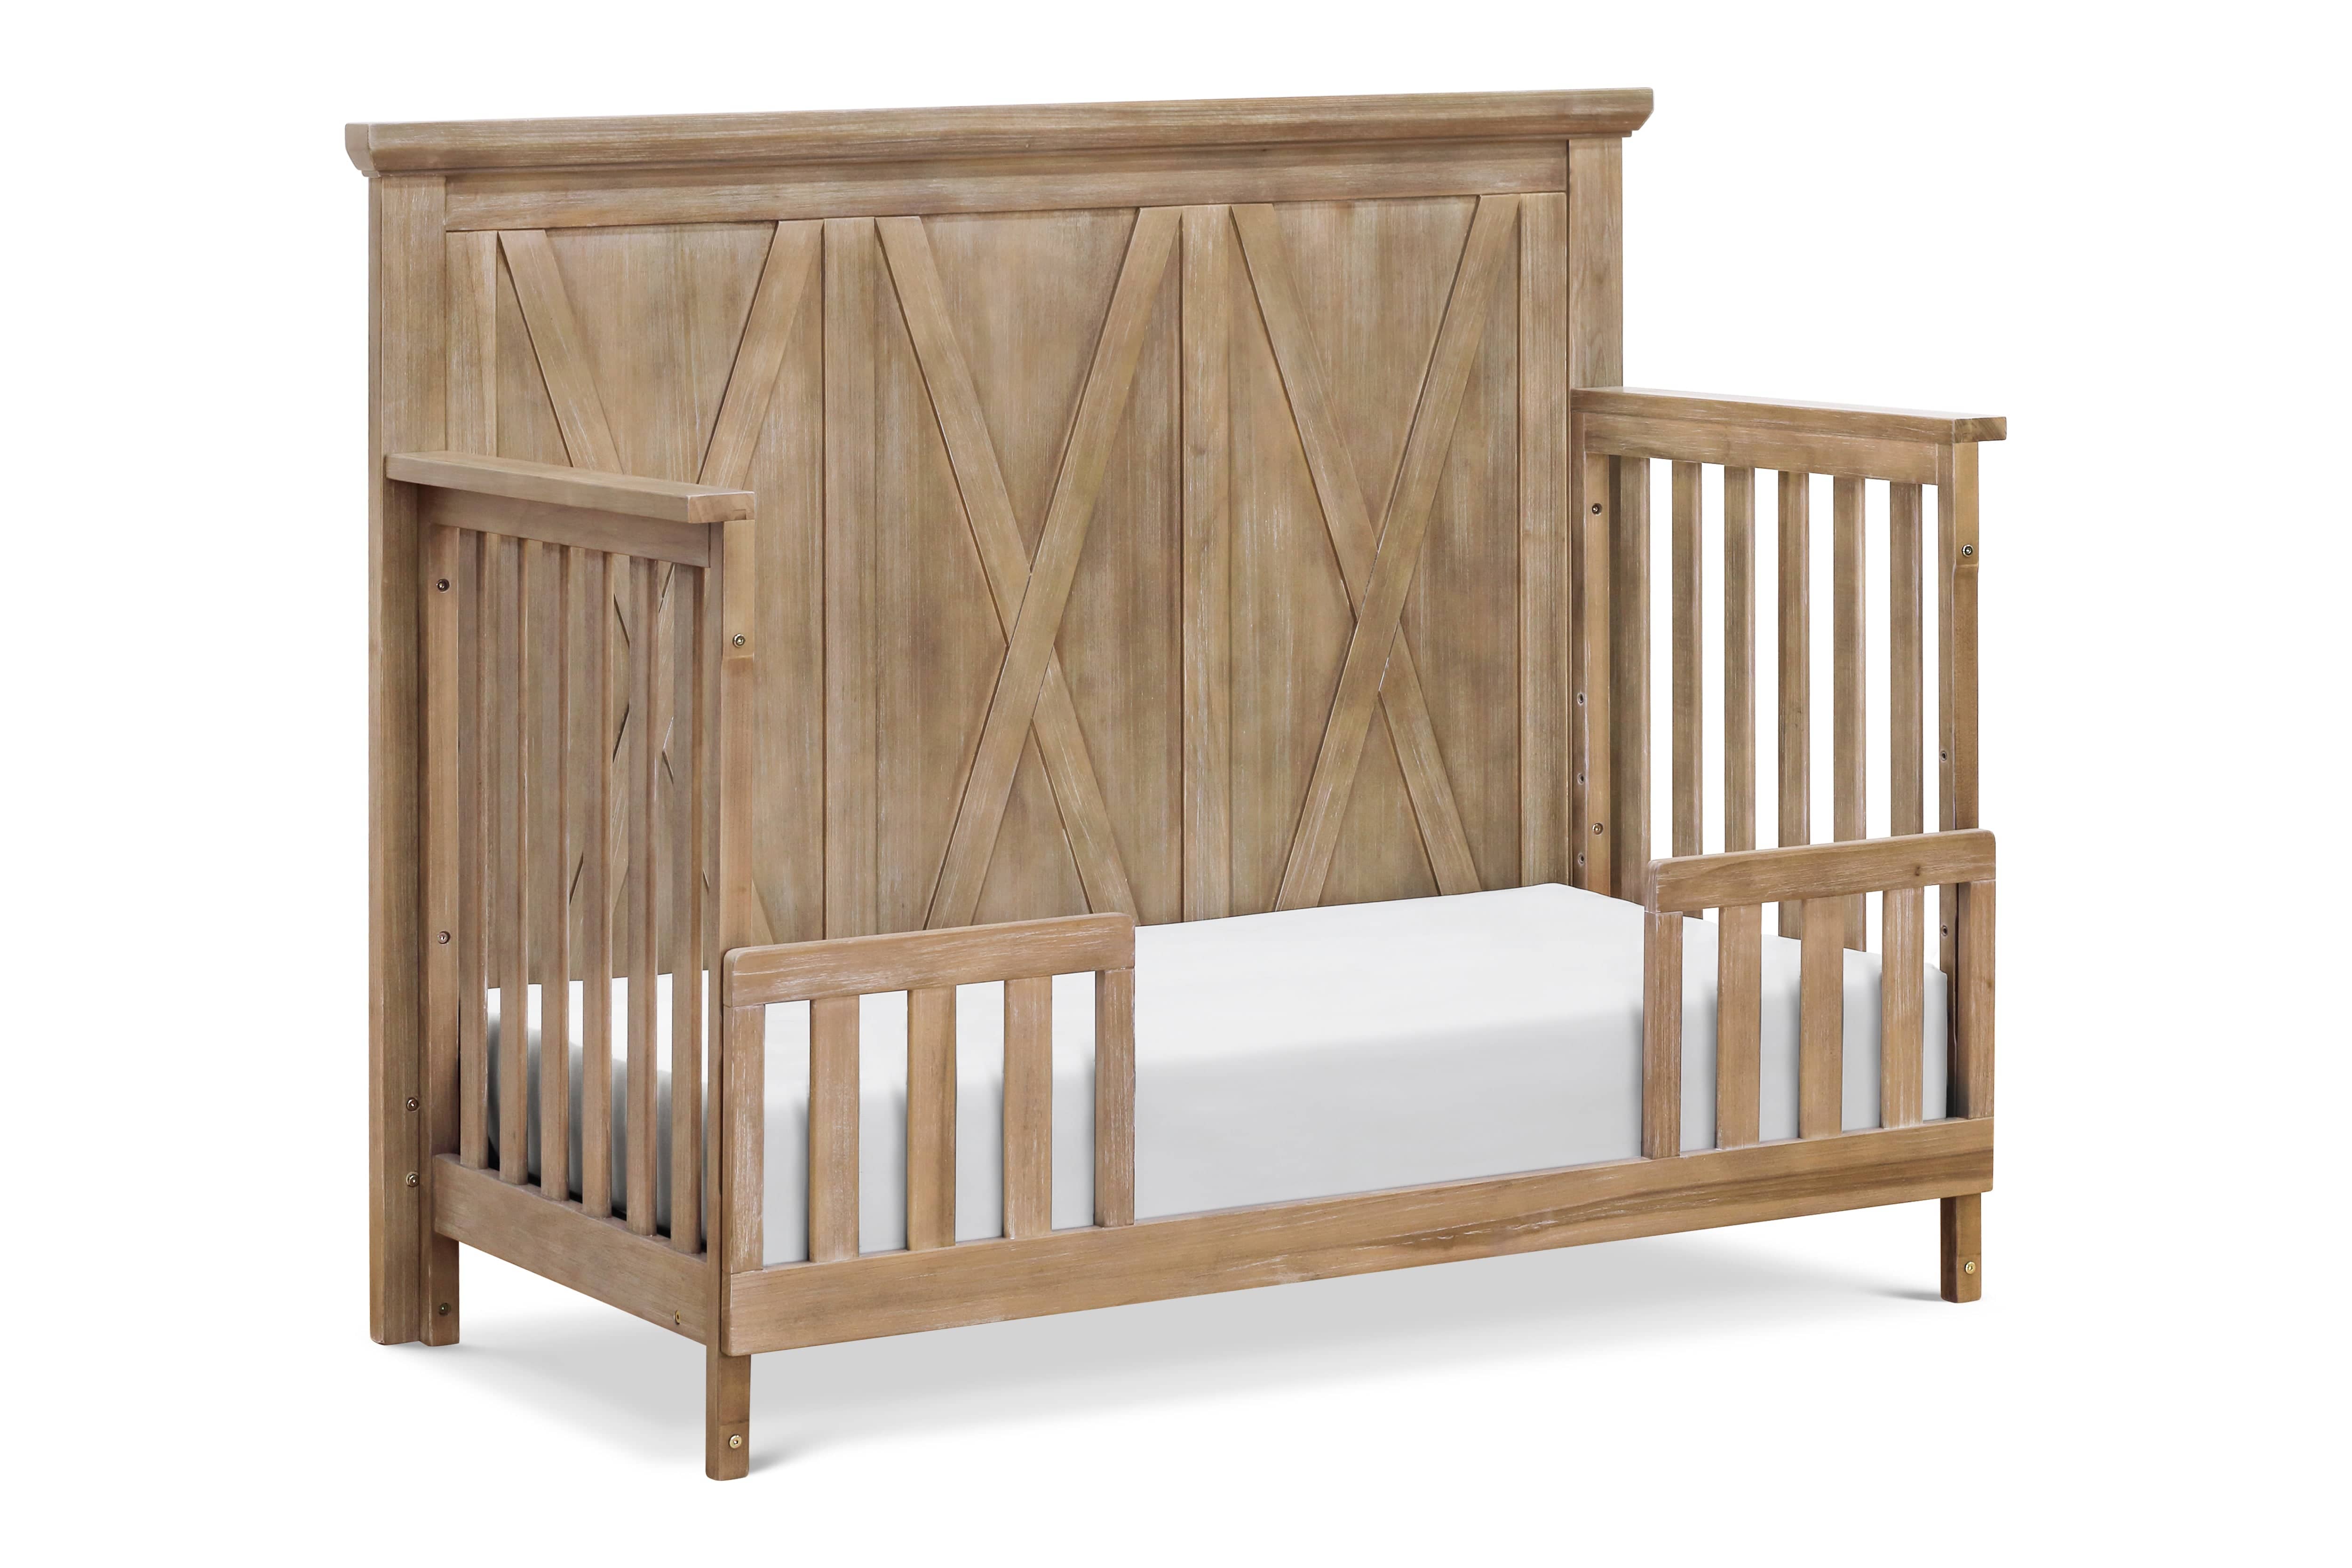 Emory Farmhouse 4-in-1 Convertible Crib - Twinkle Twinkle Little One